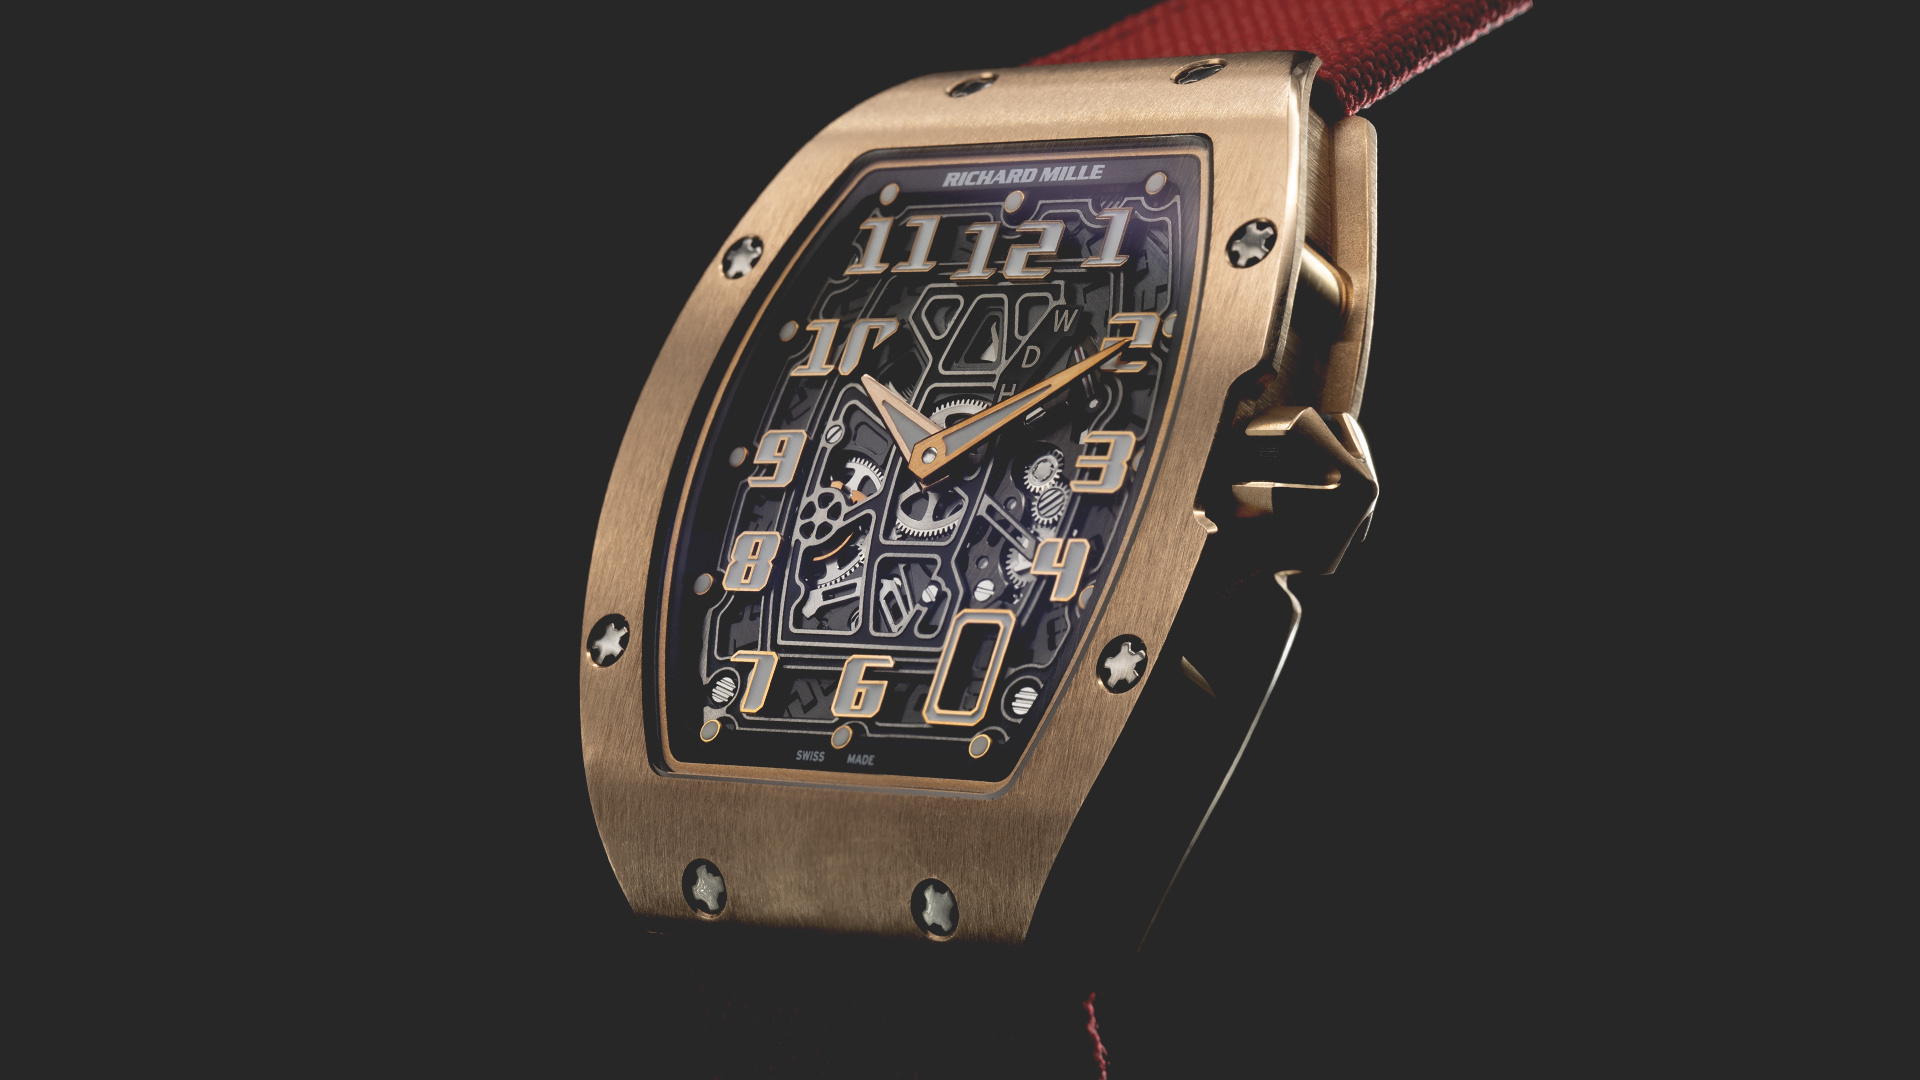 Watches - 331 Richard Mille for sale on JamesEdition